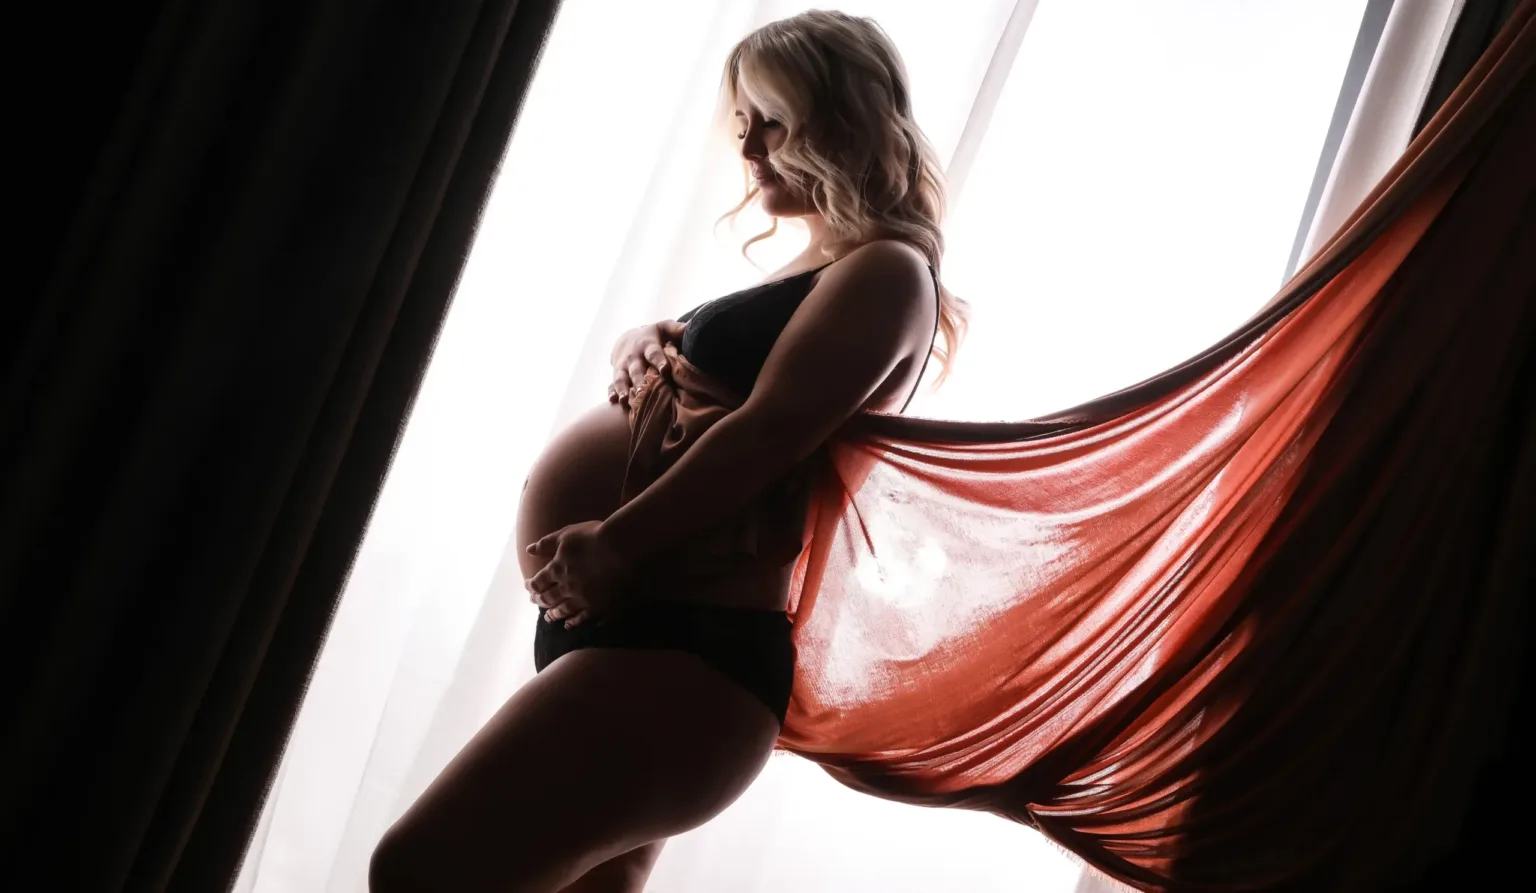 pregnant woman posing for a maternity photoshoot in front of white lights and red gown